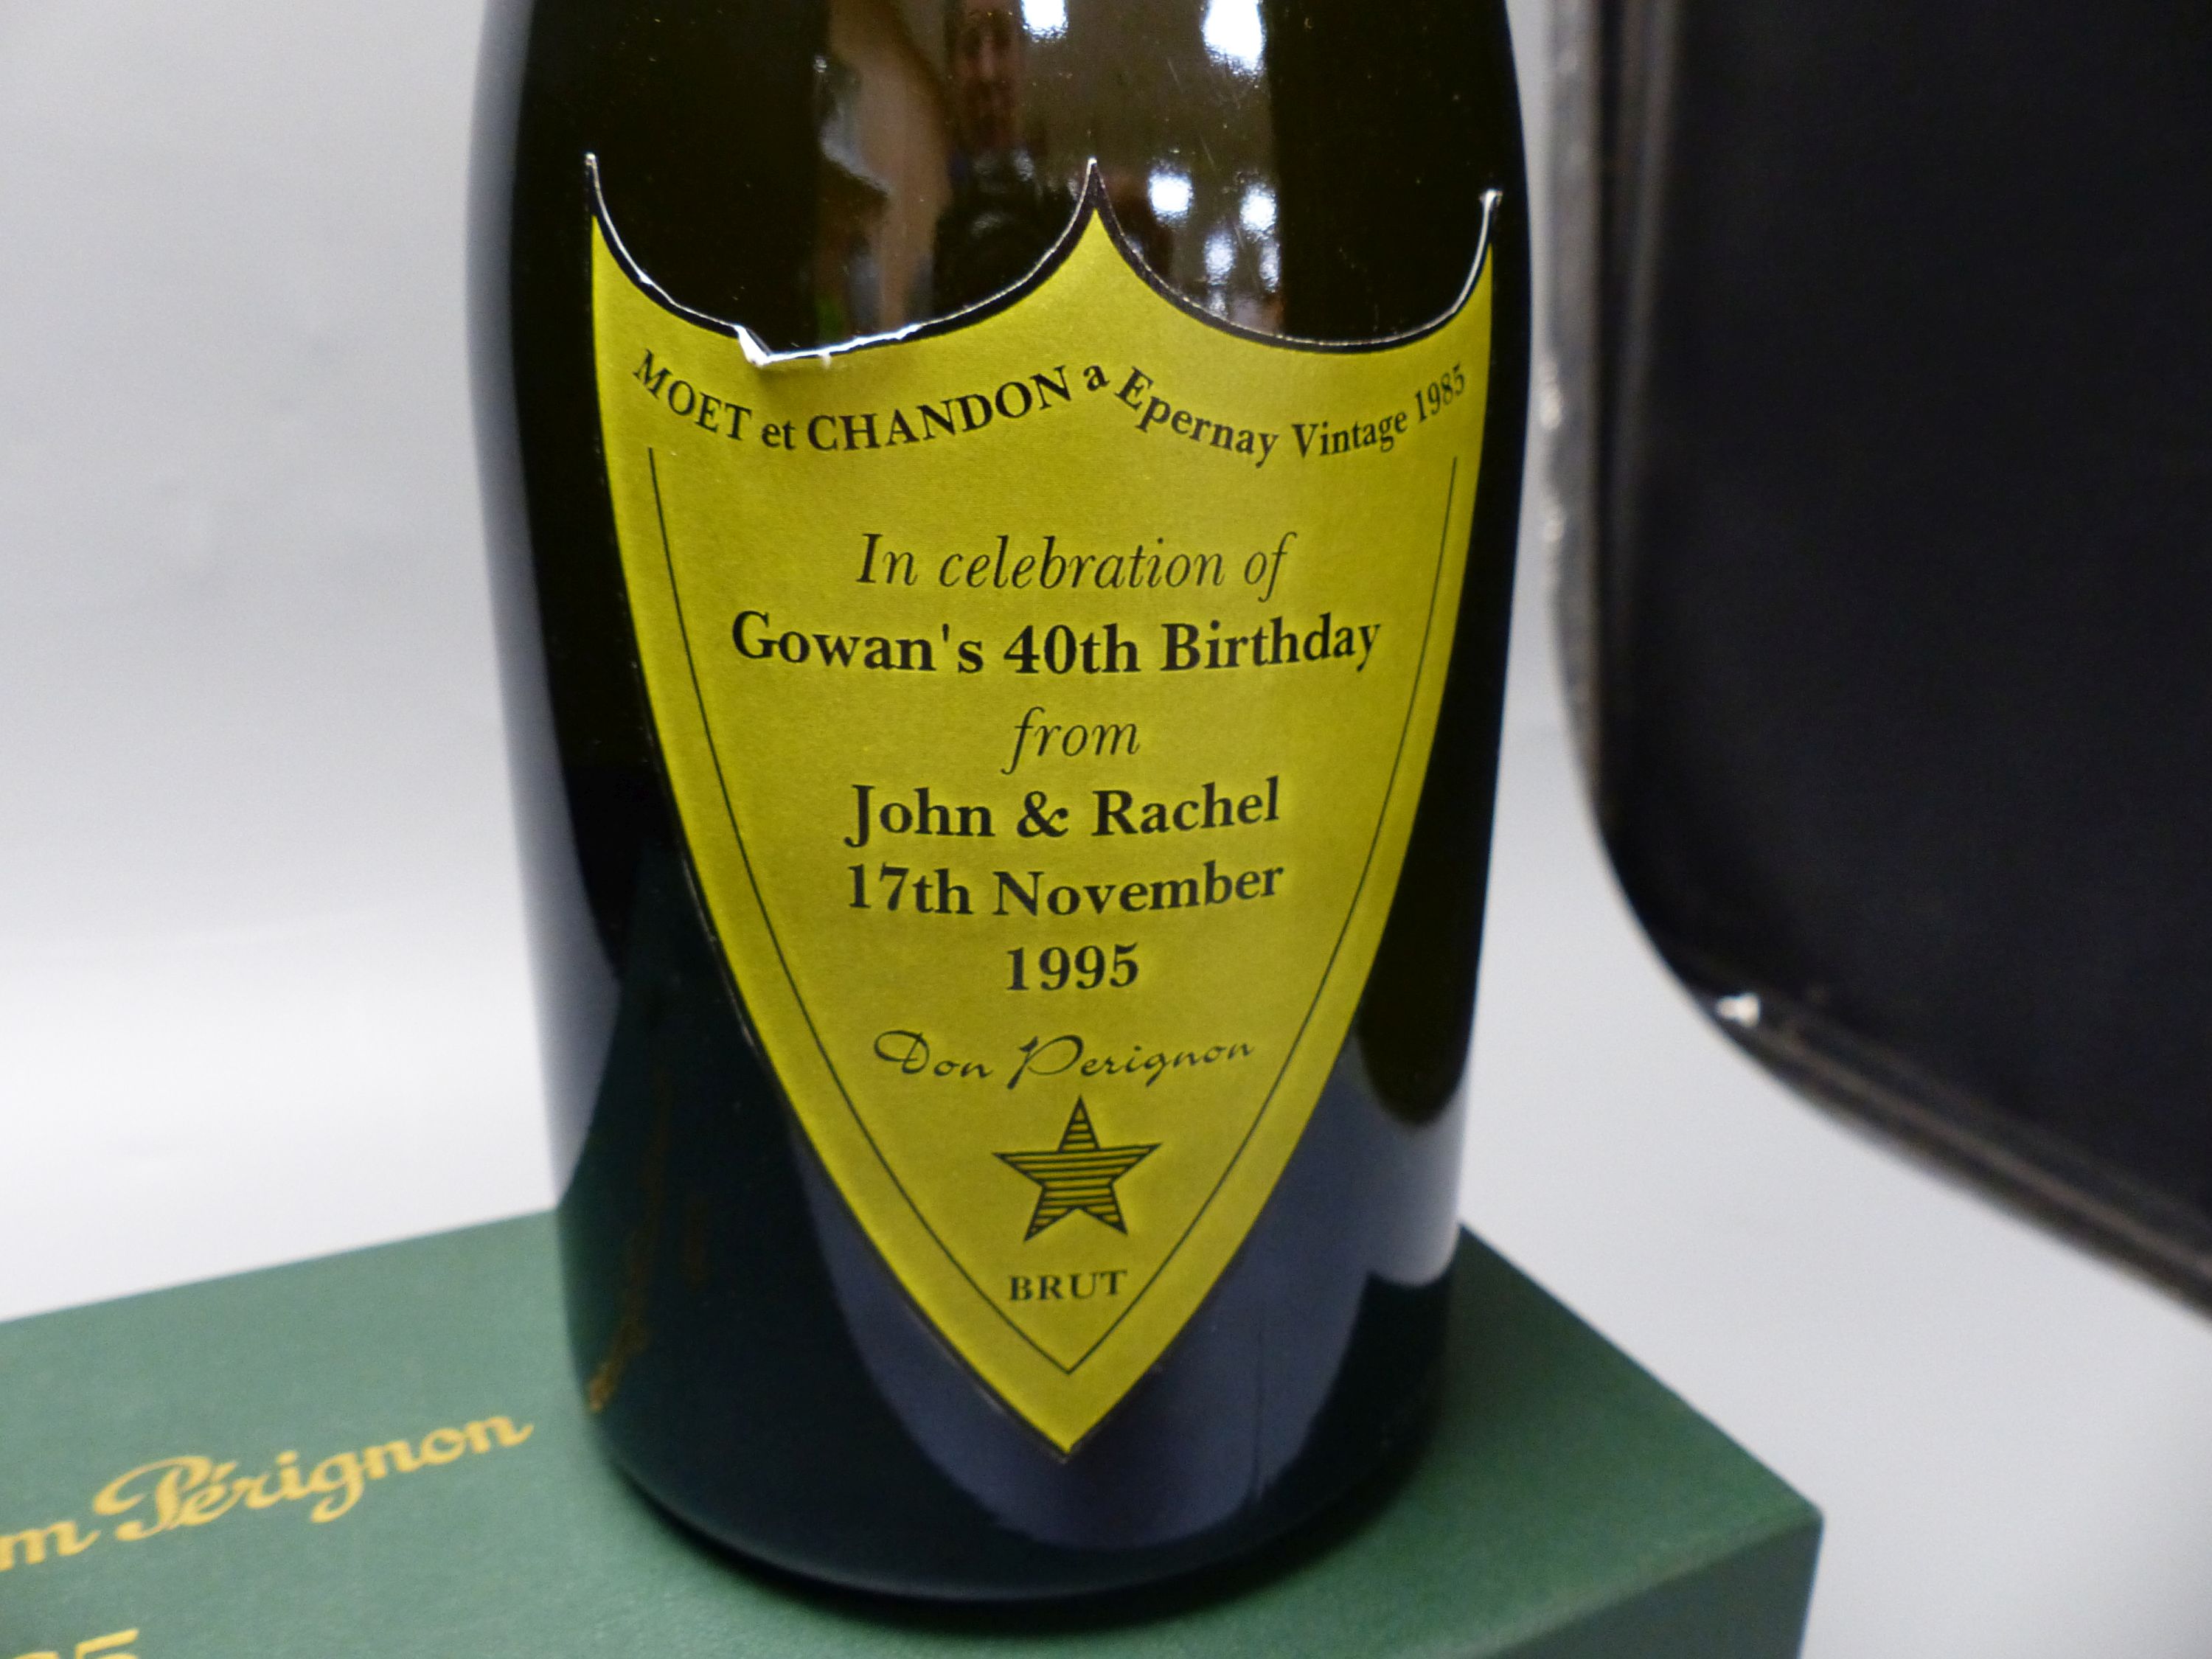 One bottle of Dom Perignon, 1985, with later personalised presentation label, boxed.